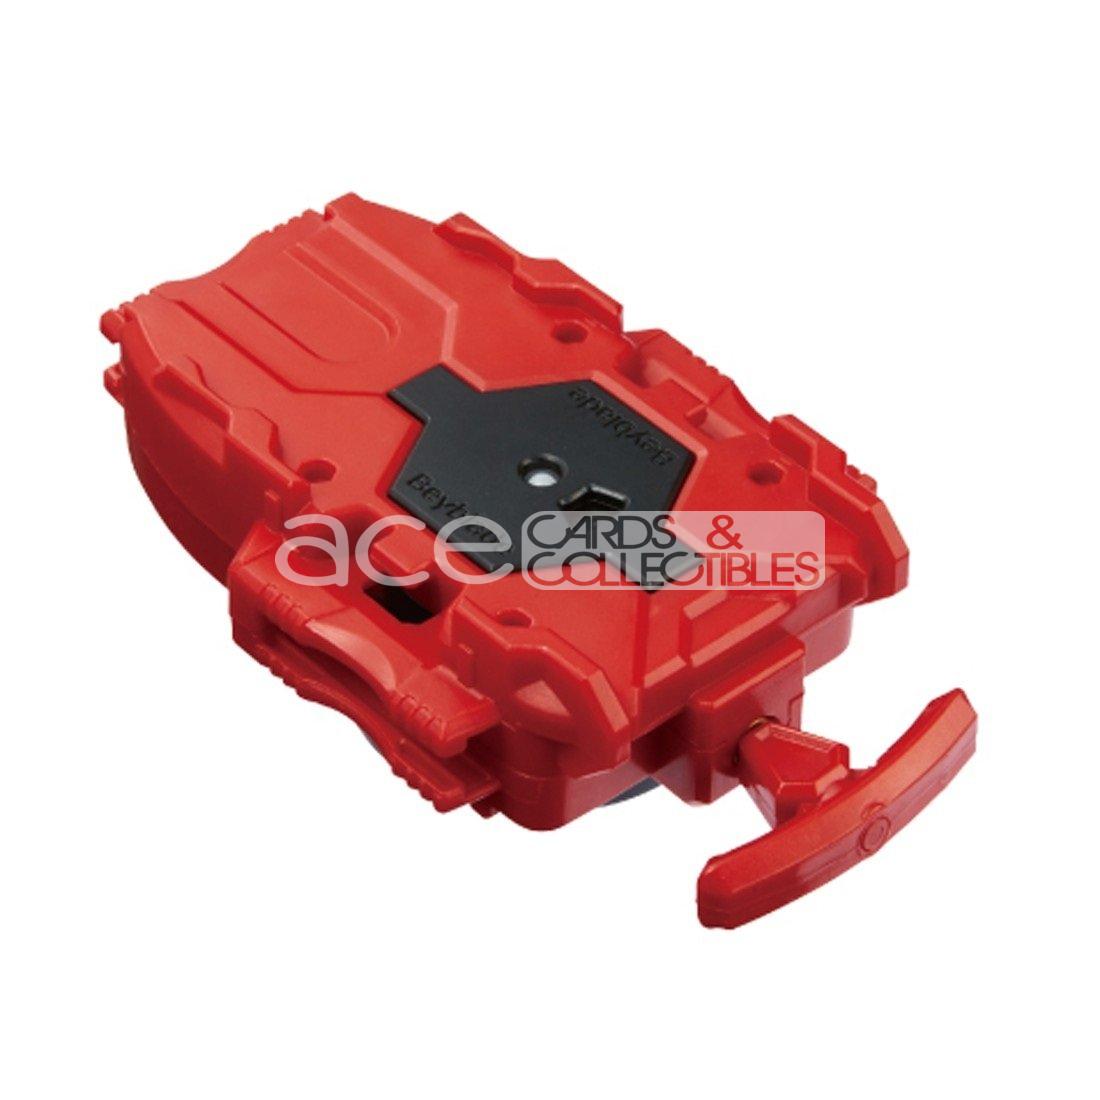 Beyblade Burst B-108 Bey Launcher Red-Takara Tomy-Ace Cards & Collectibles